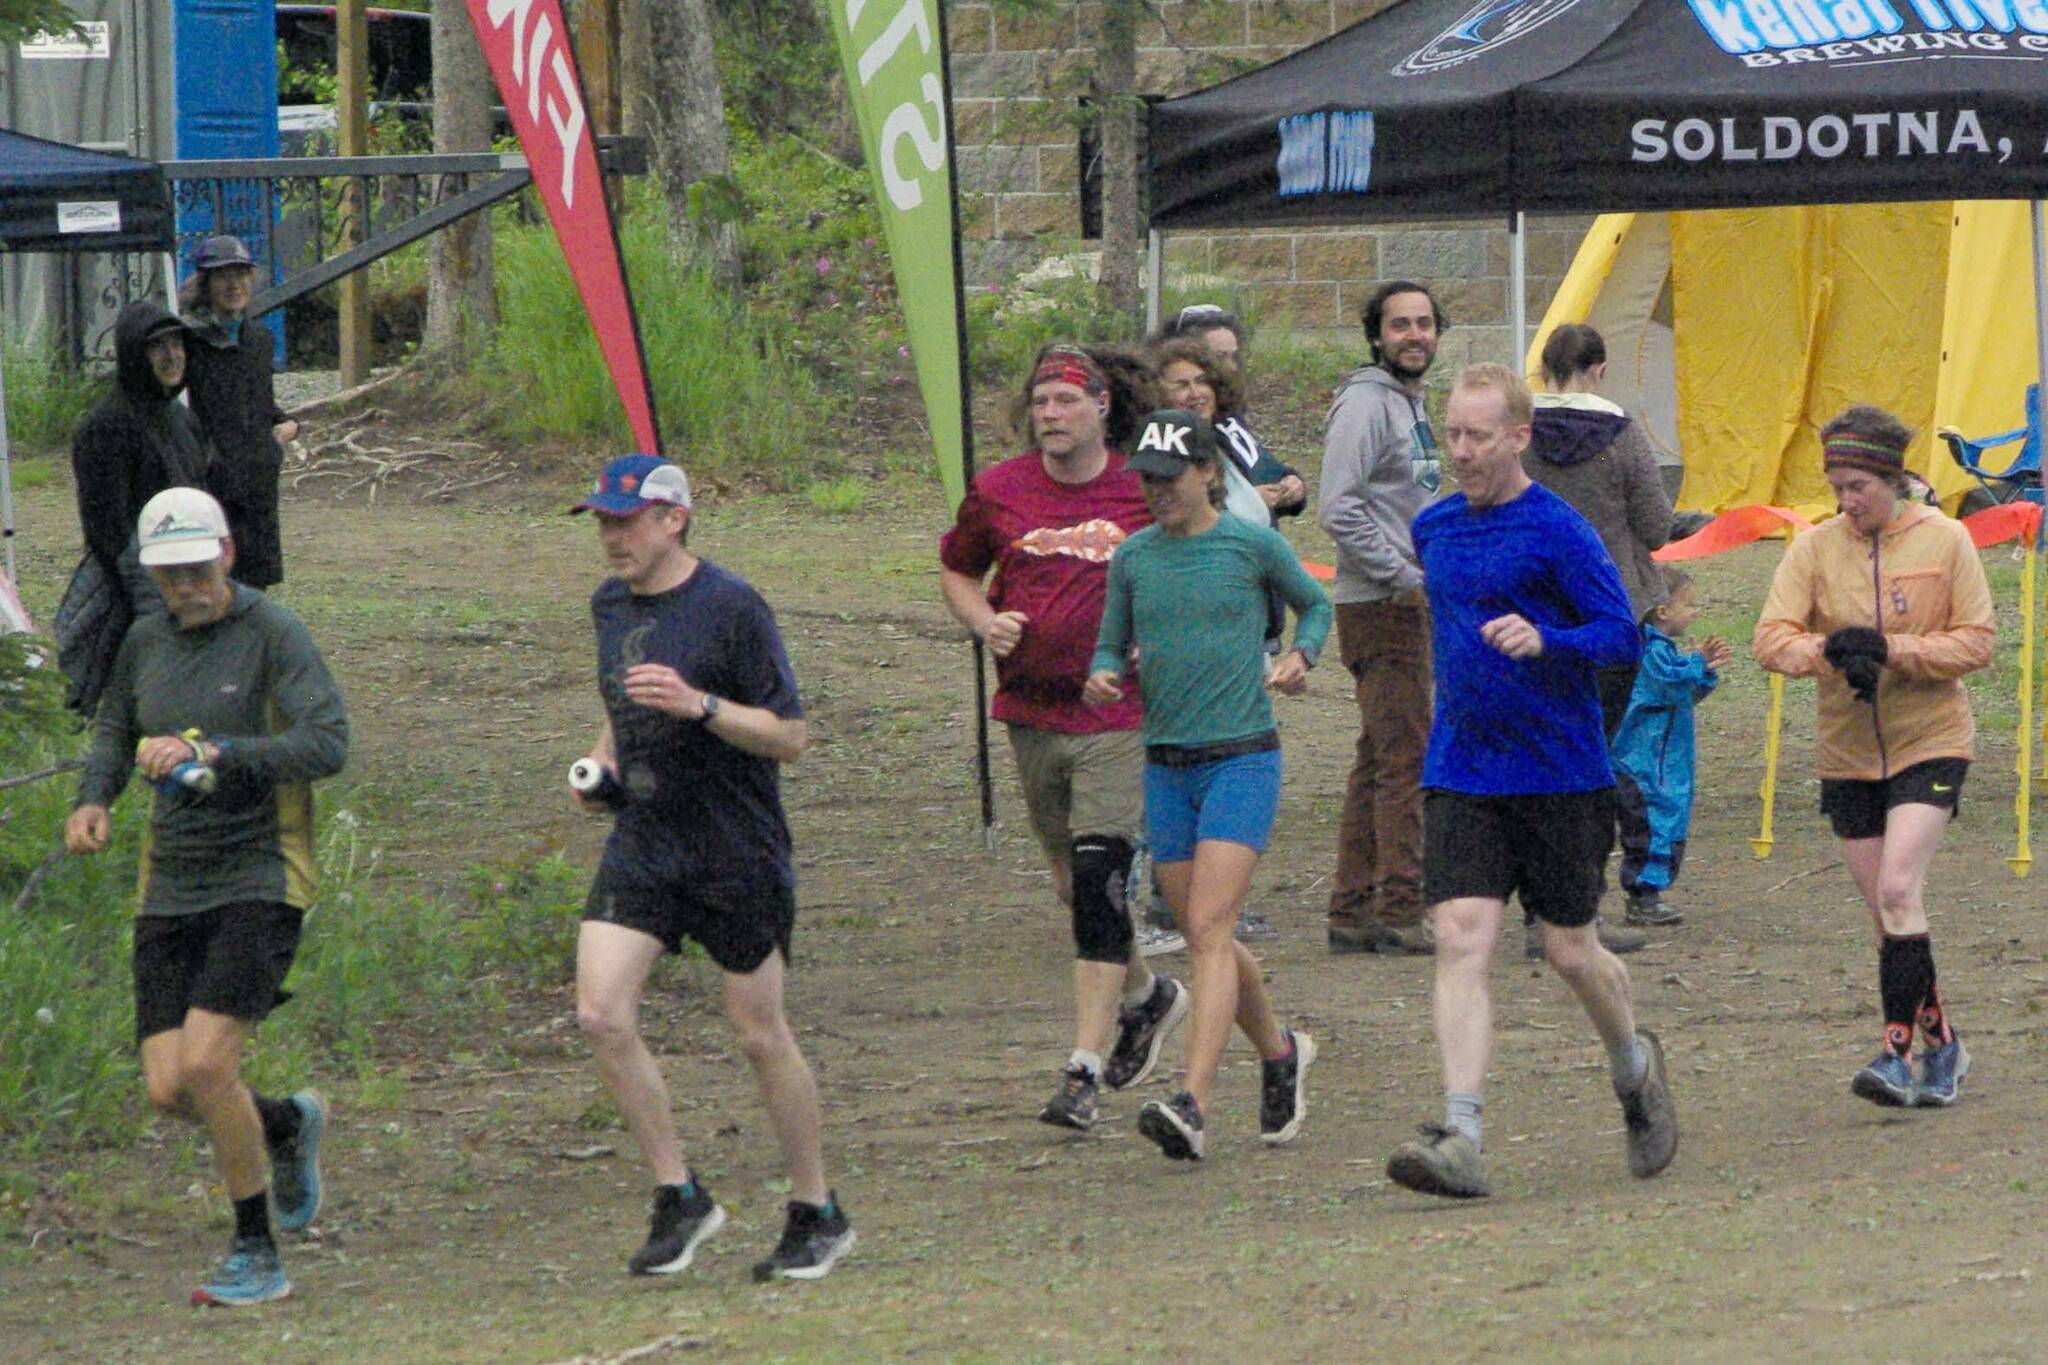 The seven runners left in the Tsalteshi Backyard Ultra ѠDave Short, Zach Behney, Sean Goff, Carrie Setian, Kent Peterson, Yvonne Leutwyler and Rustin Hitchcock Ѡtake off on their fifth lap of the 4.167-mile loop Friday at 9 p.m. Runners will keep doing the loop each hour until only the winner remains. The winner gets a ticket to the Tartarus Backyard Ultra in Spokane, Washington, on July 30. There were 15 runners at the start of the Tsalteshi Backyard Ultra. (Photo by Jeff Helminiak/Peninsula Clarion)